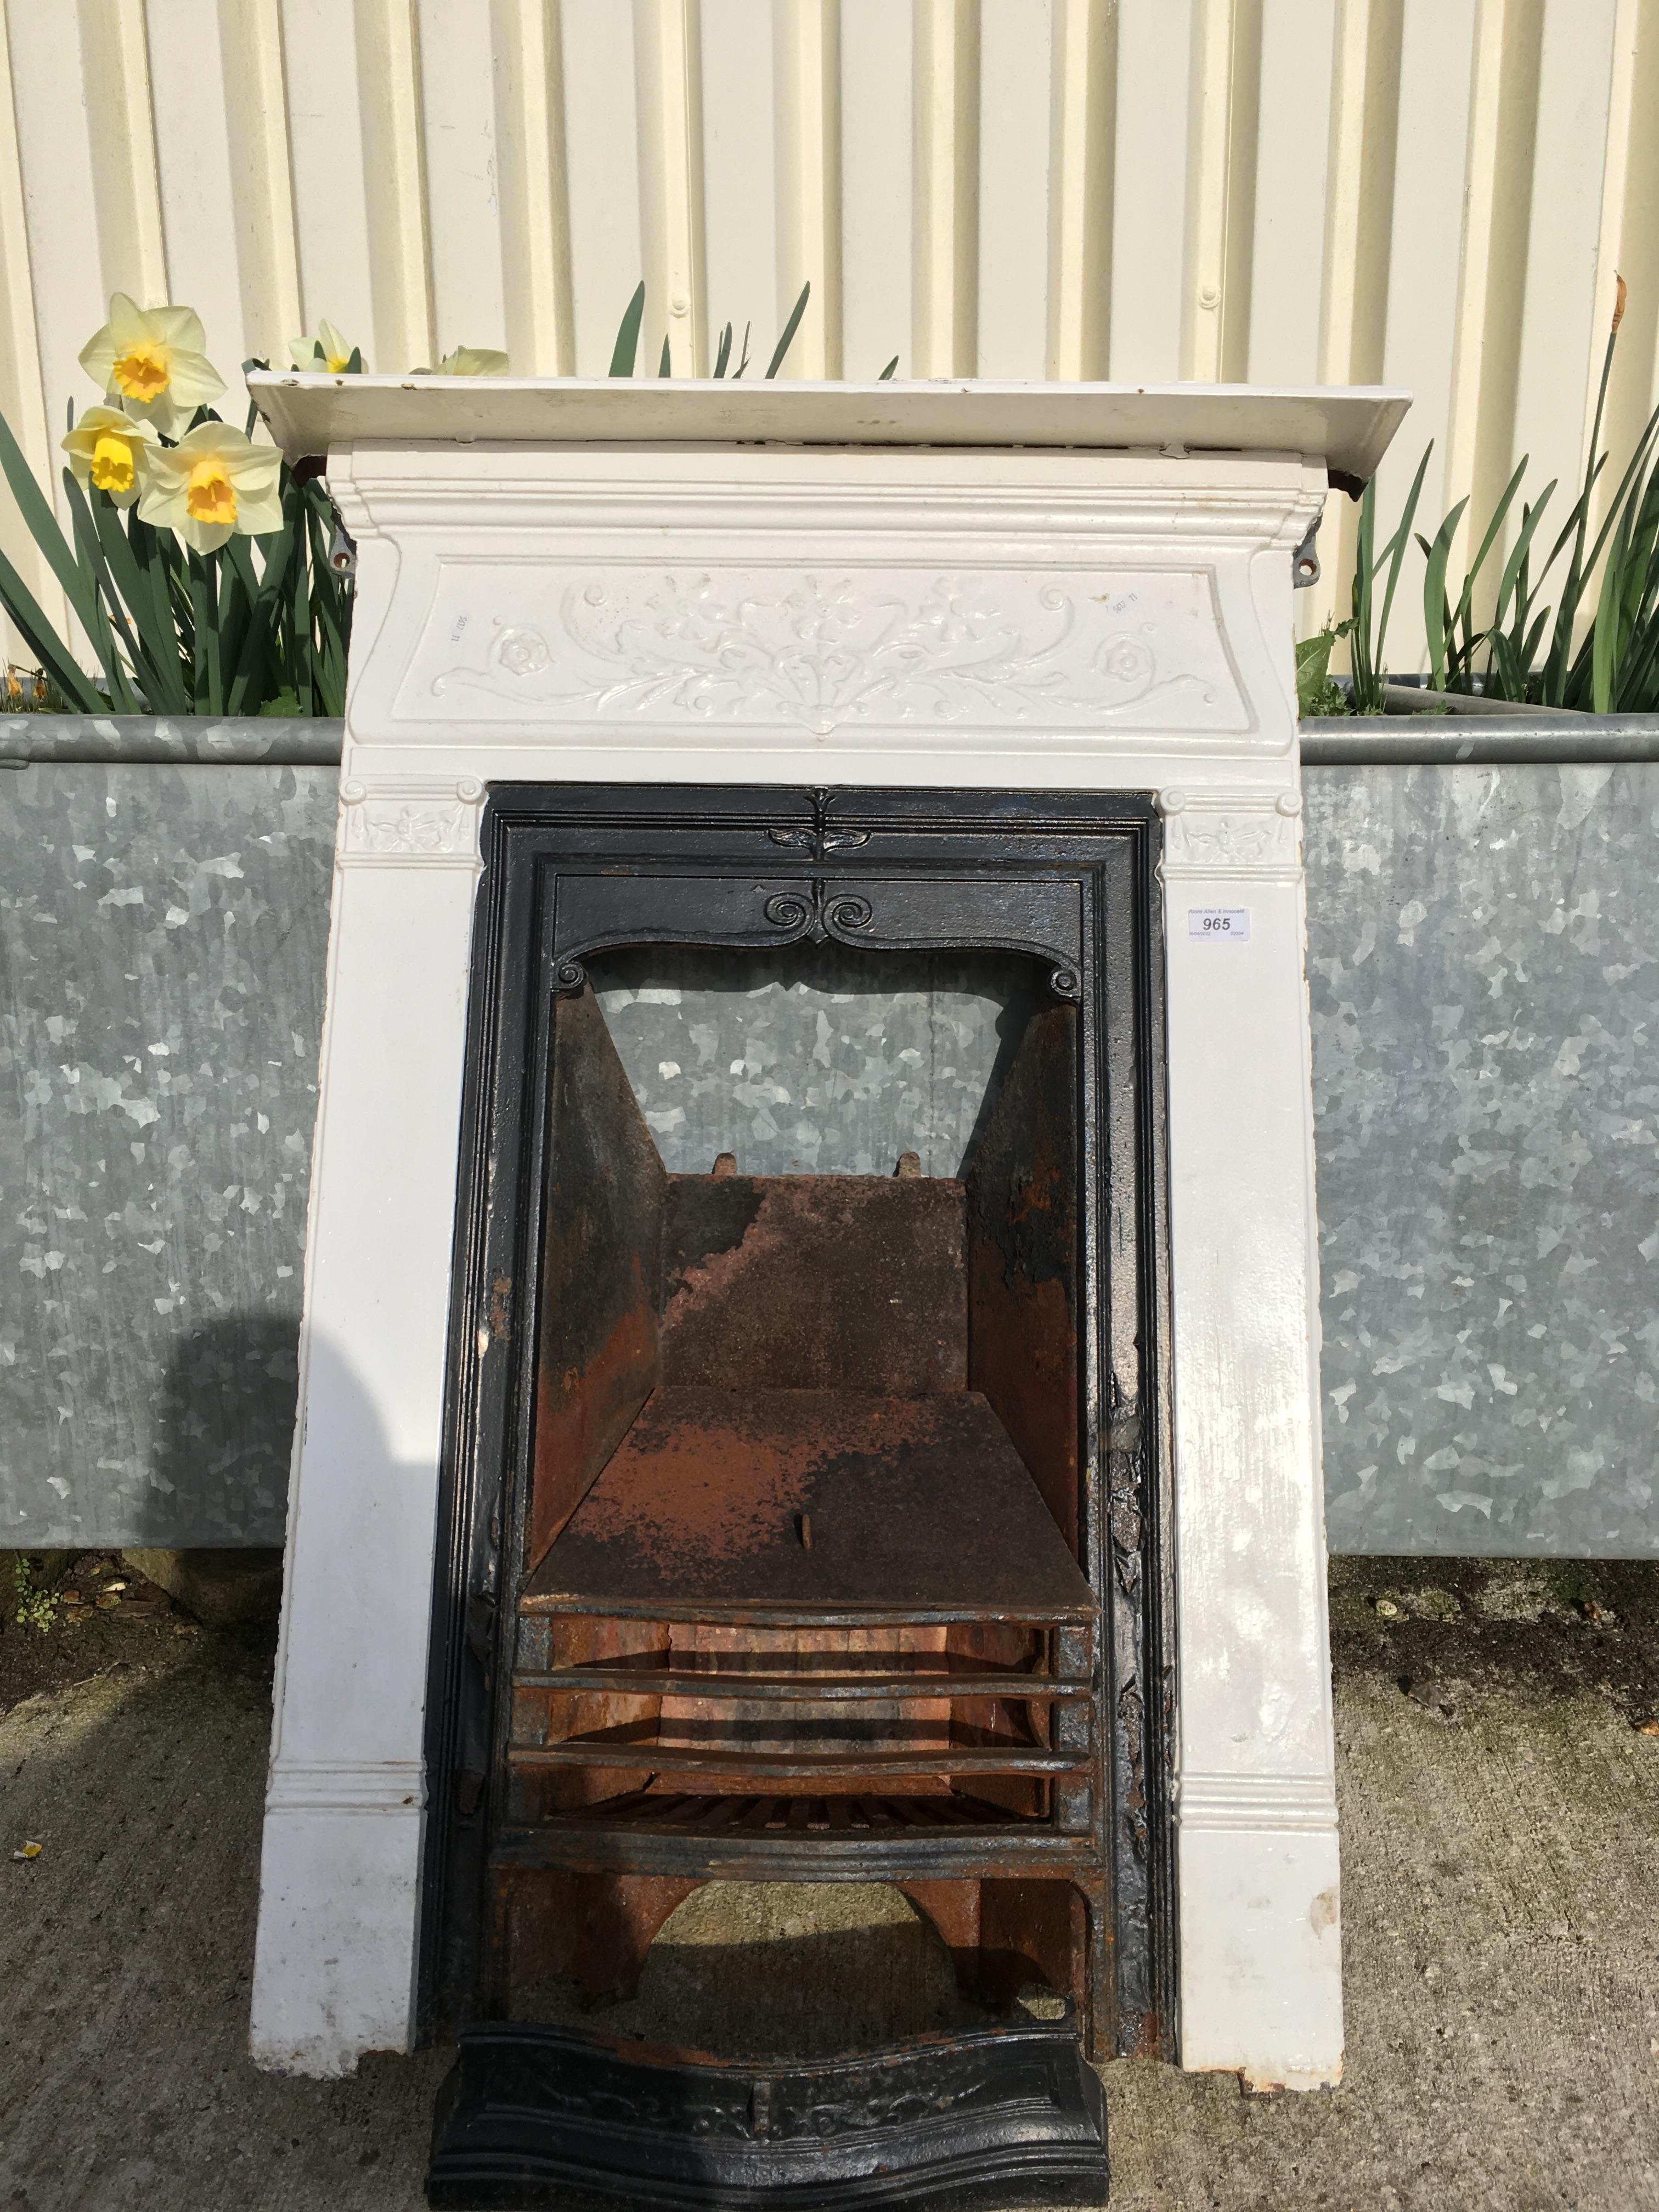 A late Victorian cast iron bedroom fireplace with basket and mantel 70 cm wide x 98 cm high